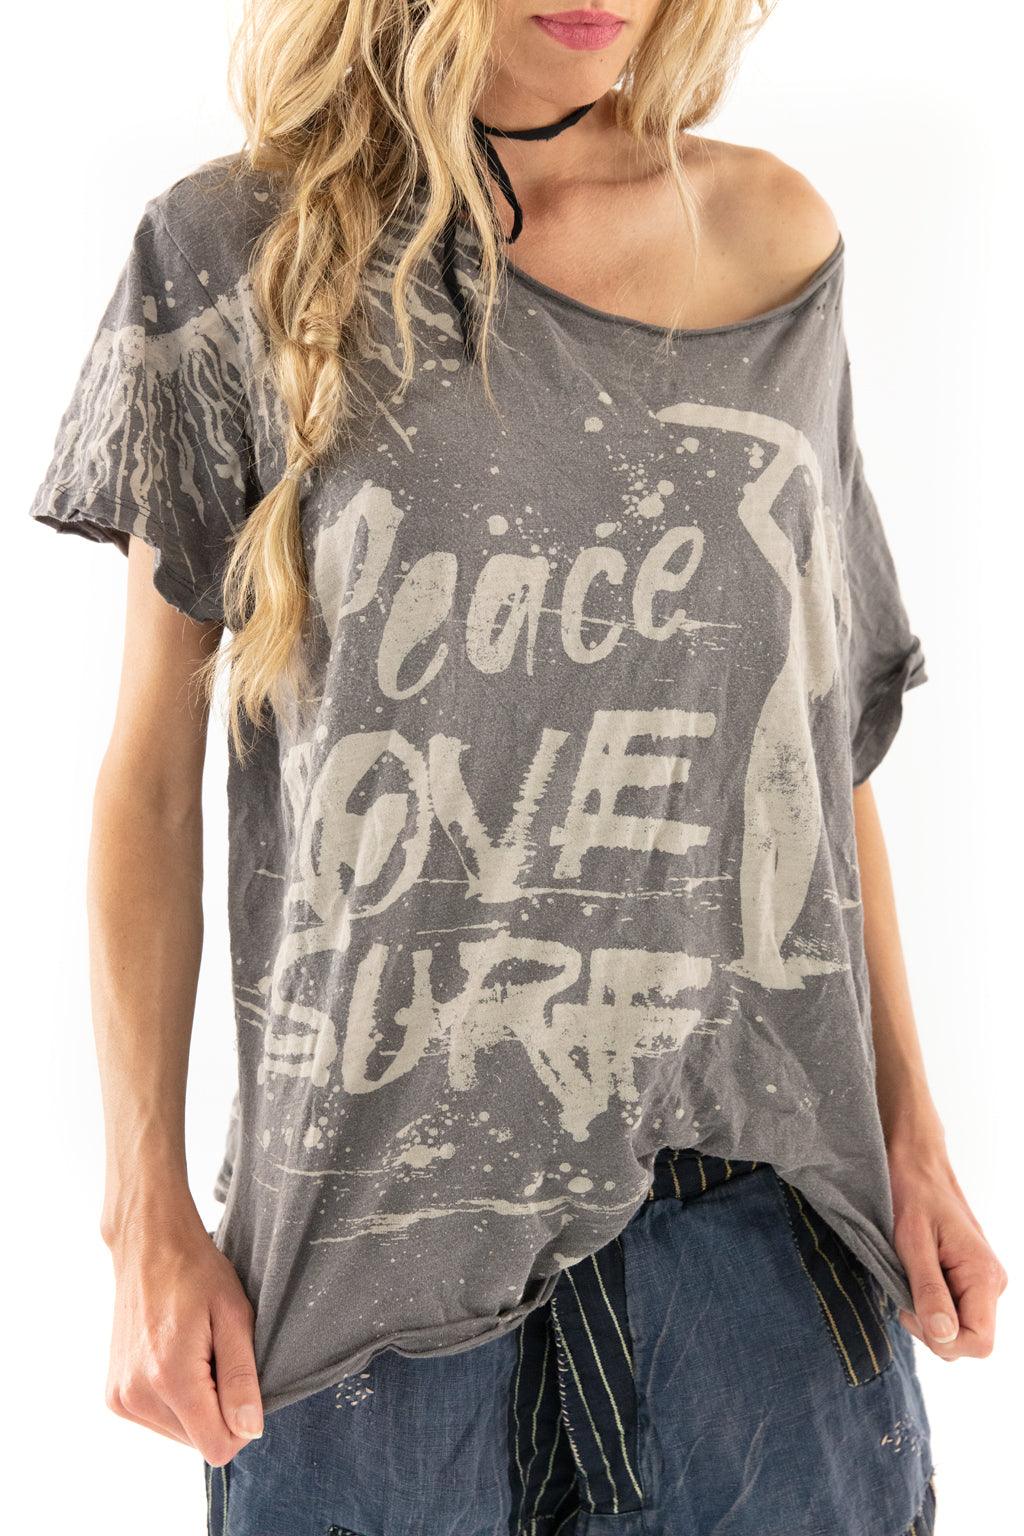 Peace, Love and Surf T - Magnolia Pearl Clothing